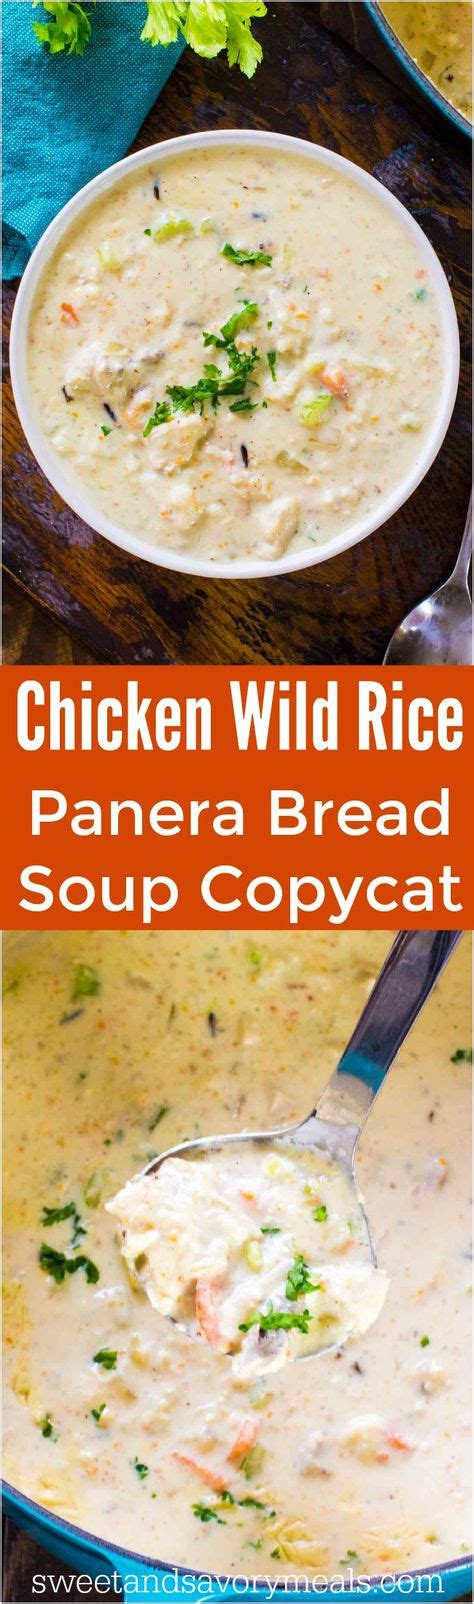 Inspired by panera bread's version, this soup delivers on flavor. Panera Bread Chicken Wild Rice Soup | Recipe (With images ...